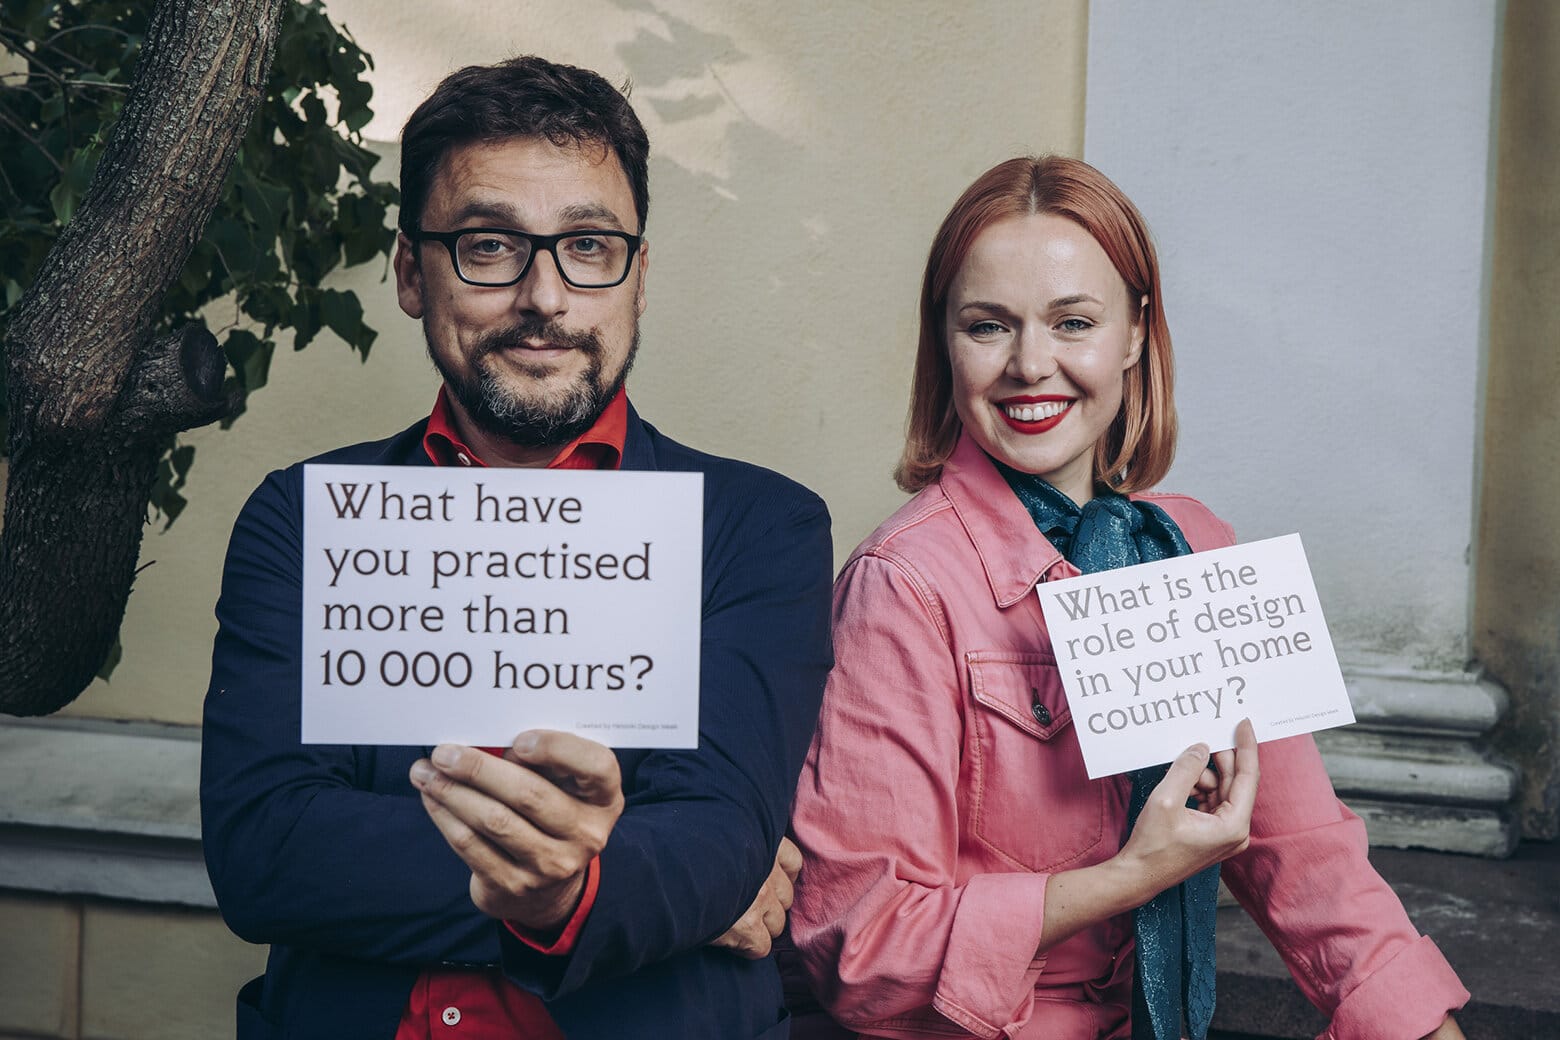 Two people sitting holding question cards.